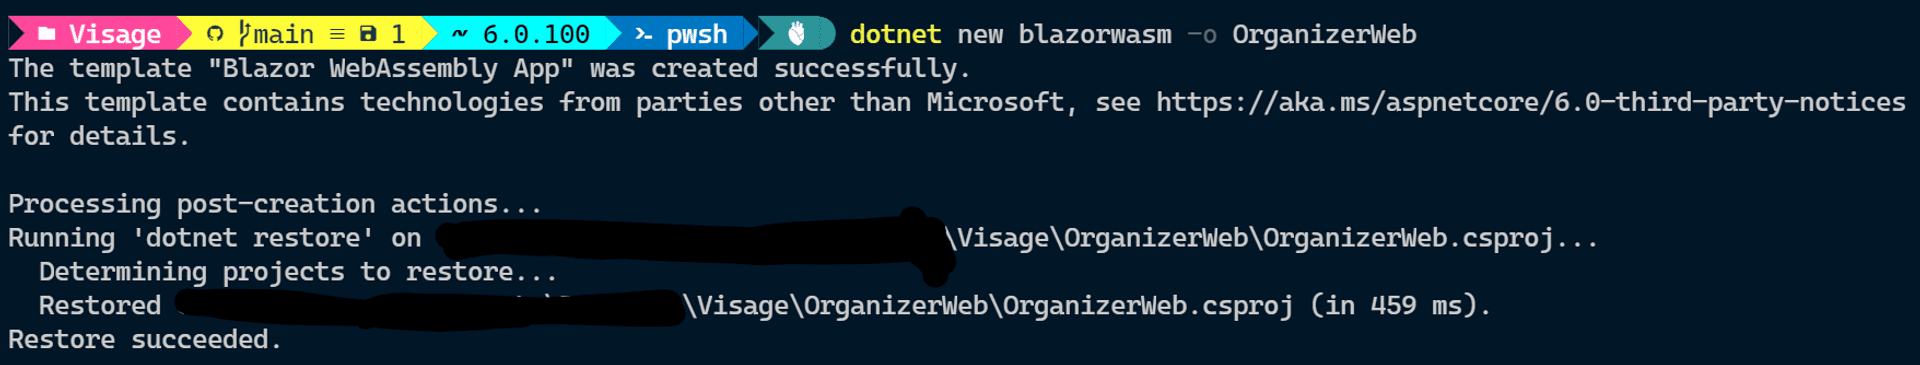 dotnet new command creating a Blazor WASM project with the terminal logs showing the output